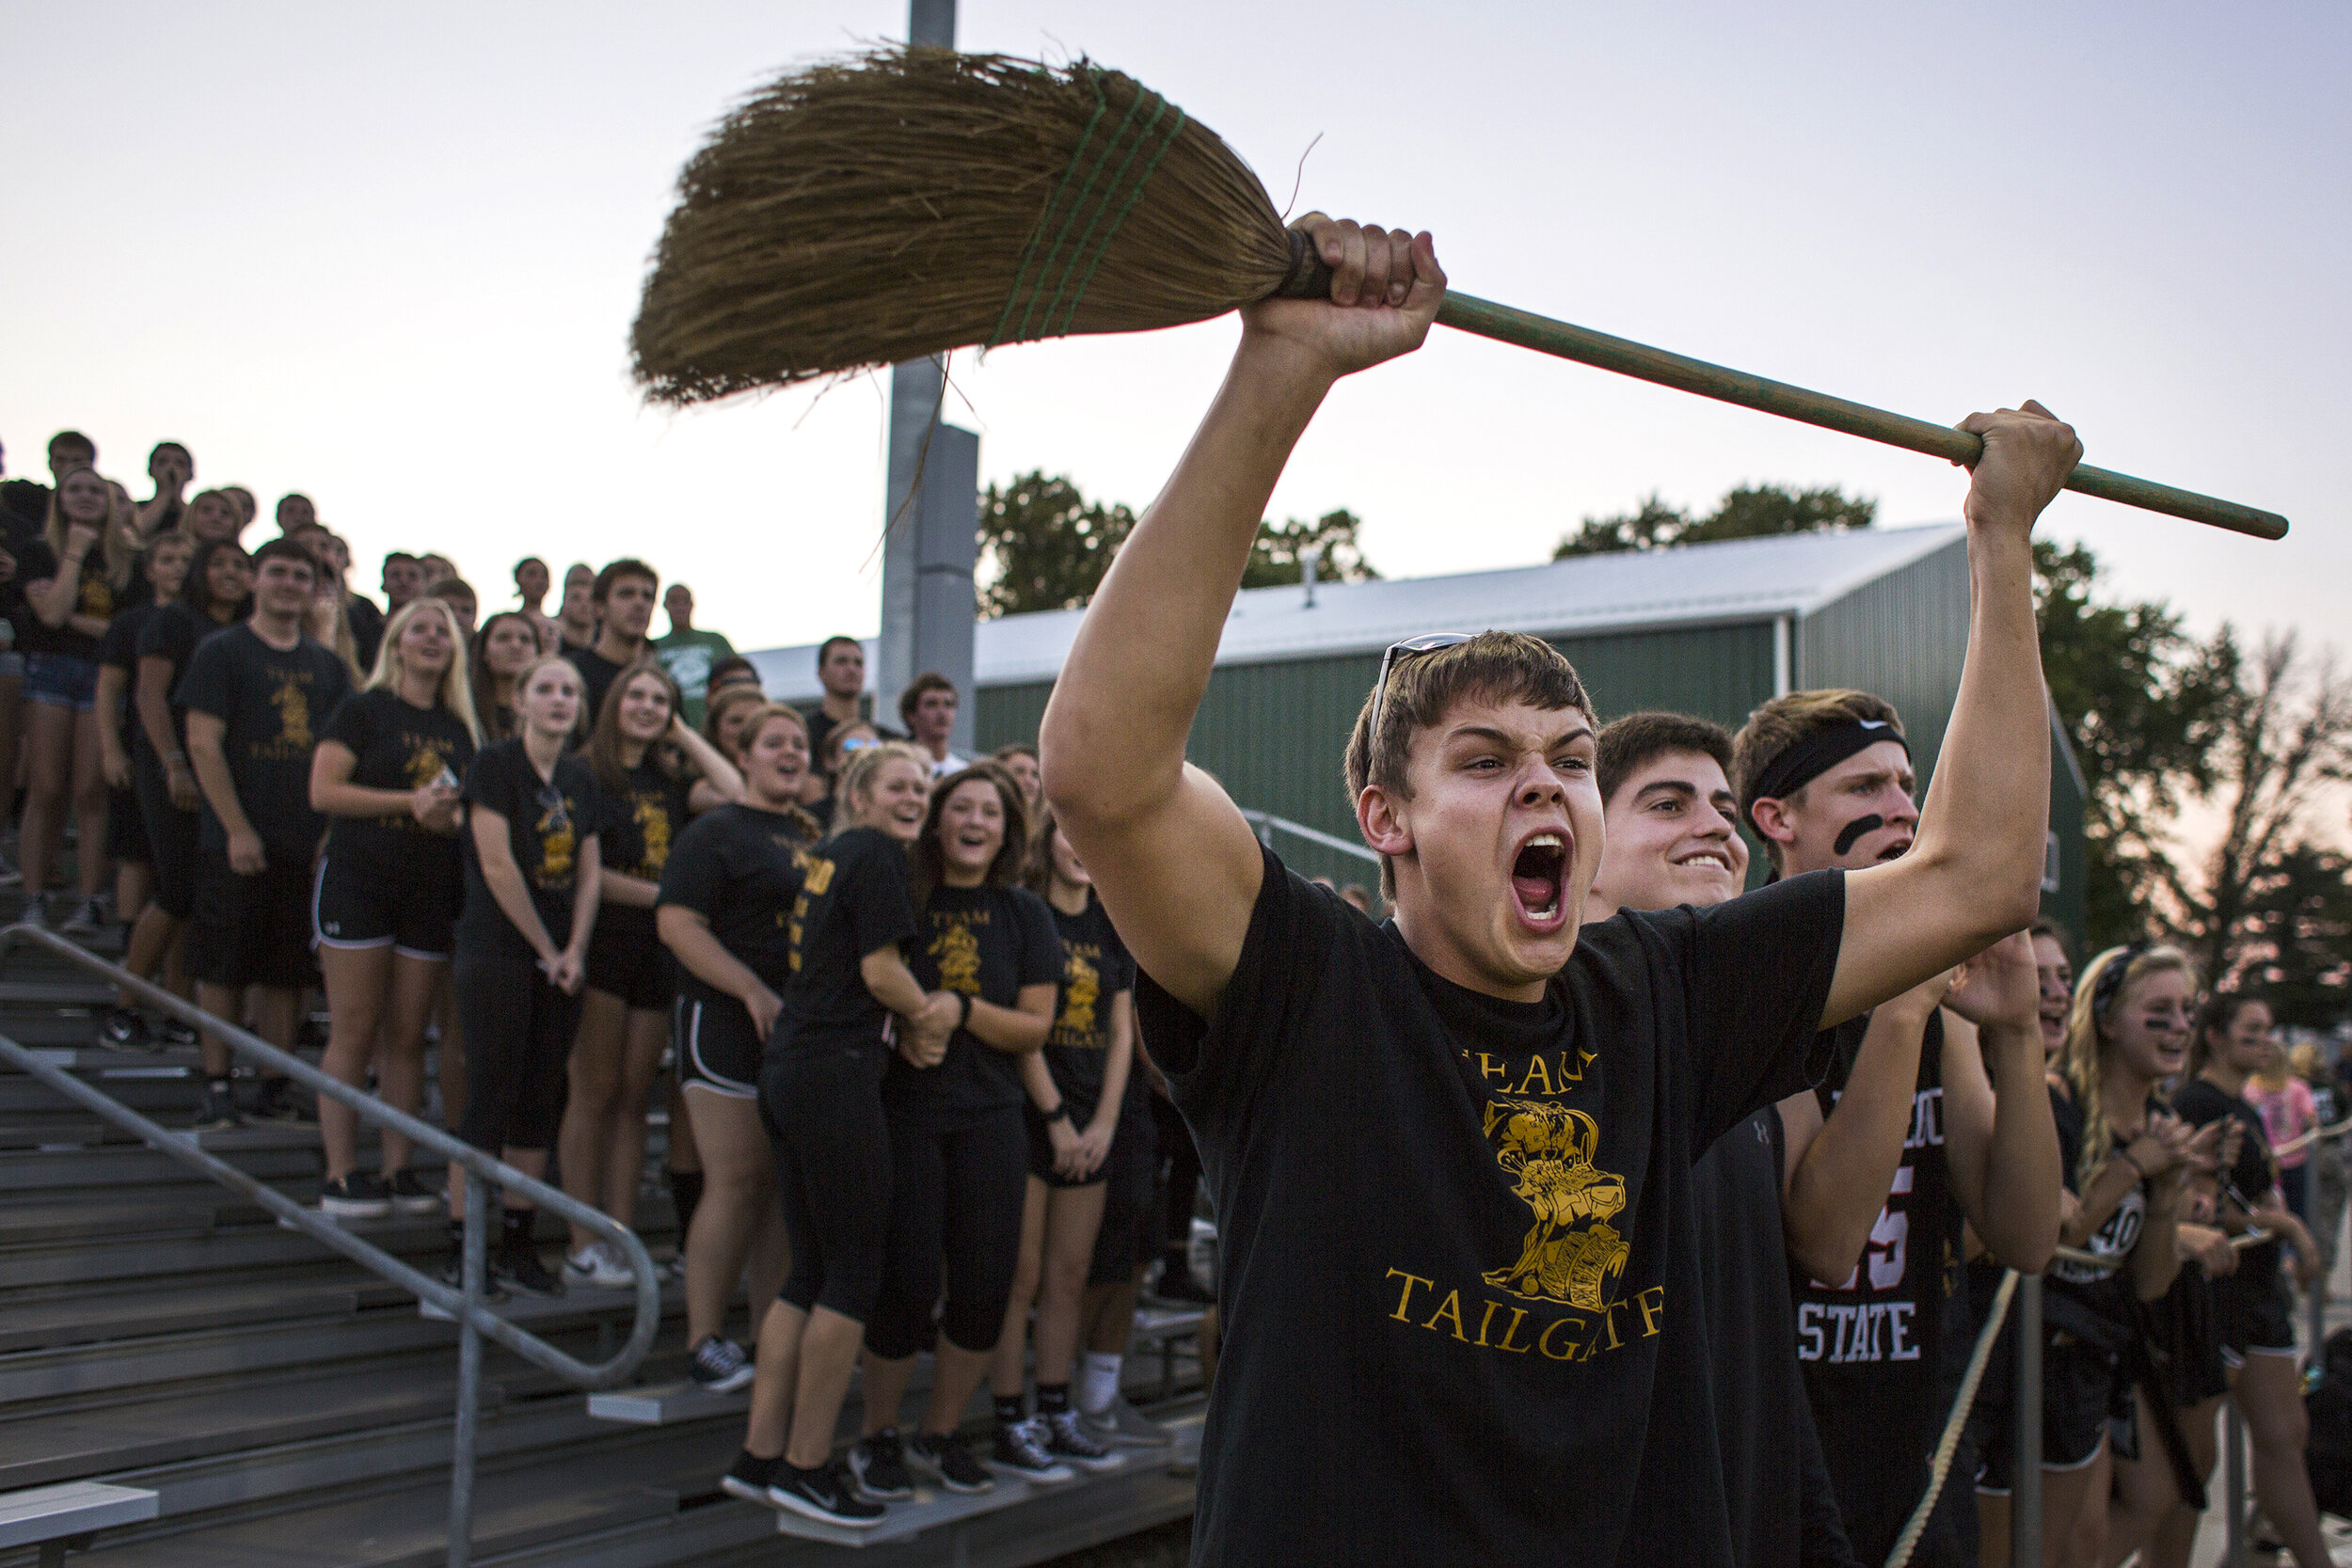  Jasper senior Jay Fritch utilized a broomstick as he cheered for the Wildcats on Sept. 15 during the team's 33-20 loss to Vincennes Lincoln in Vincennes, Indiana. Fritch said the purpose of the broom was "to clean up the mess."  